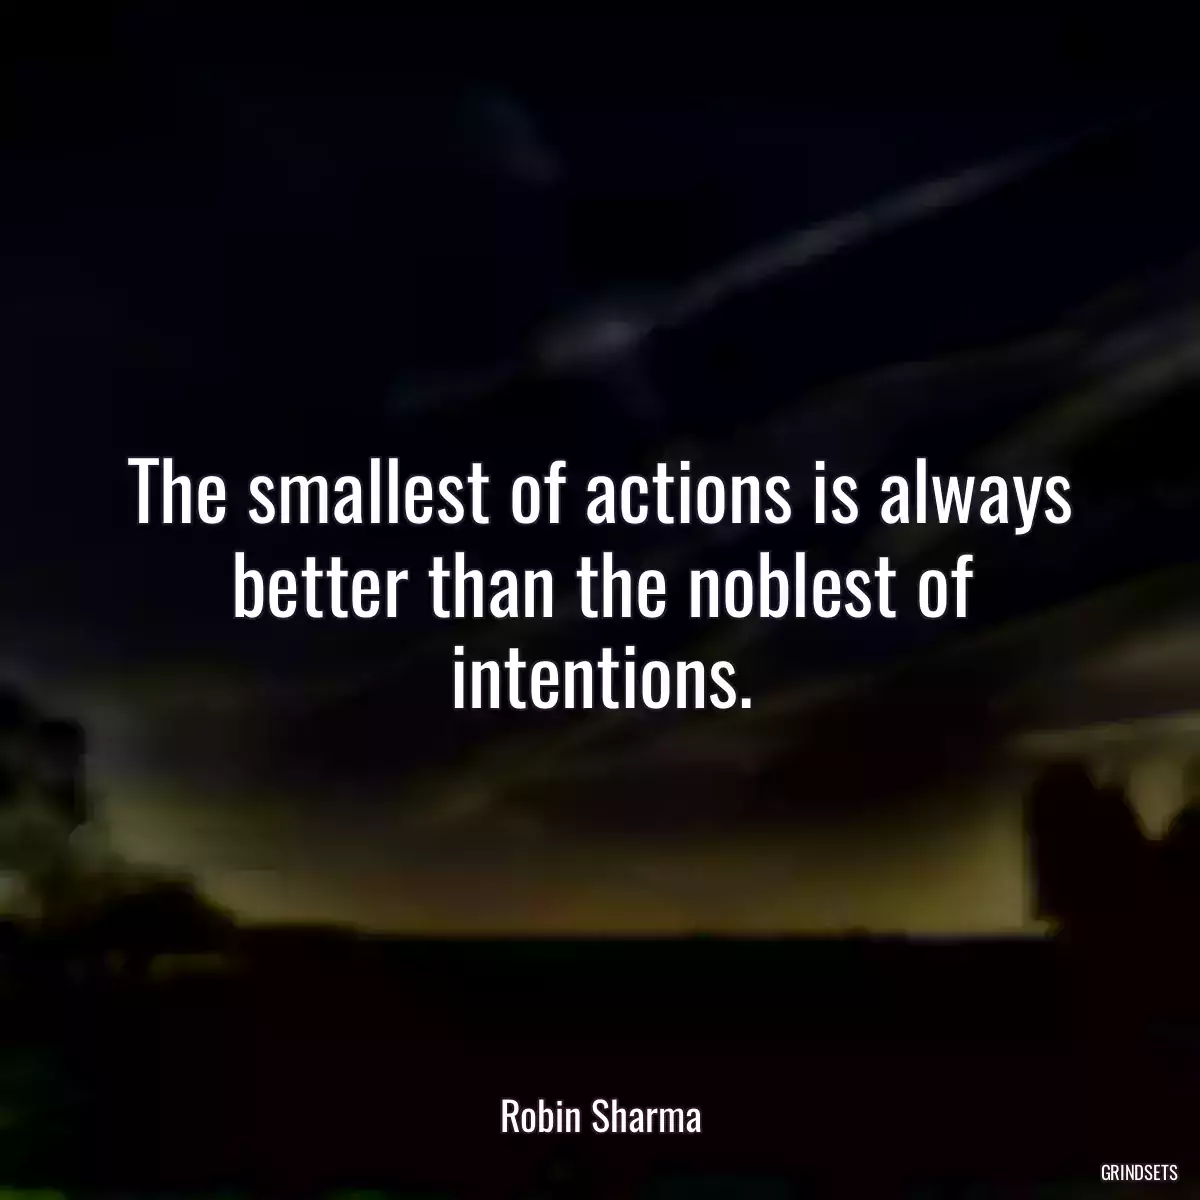 The smallest of actions is always better than the noblest of intentions.